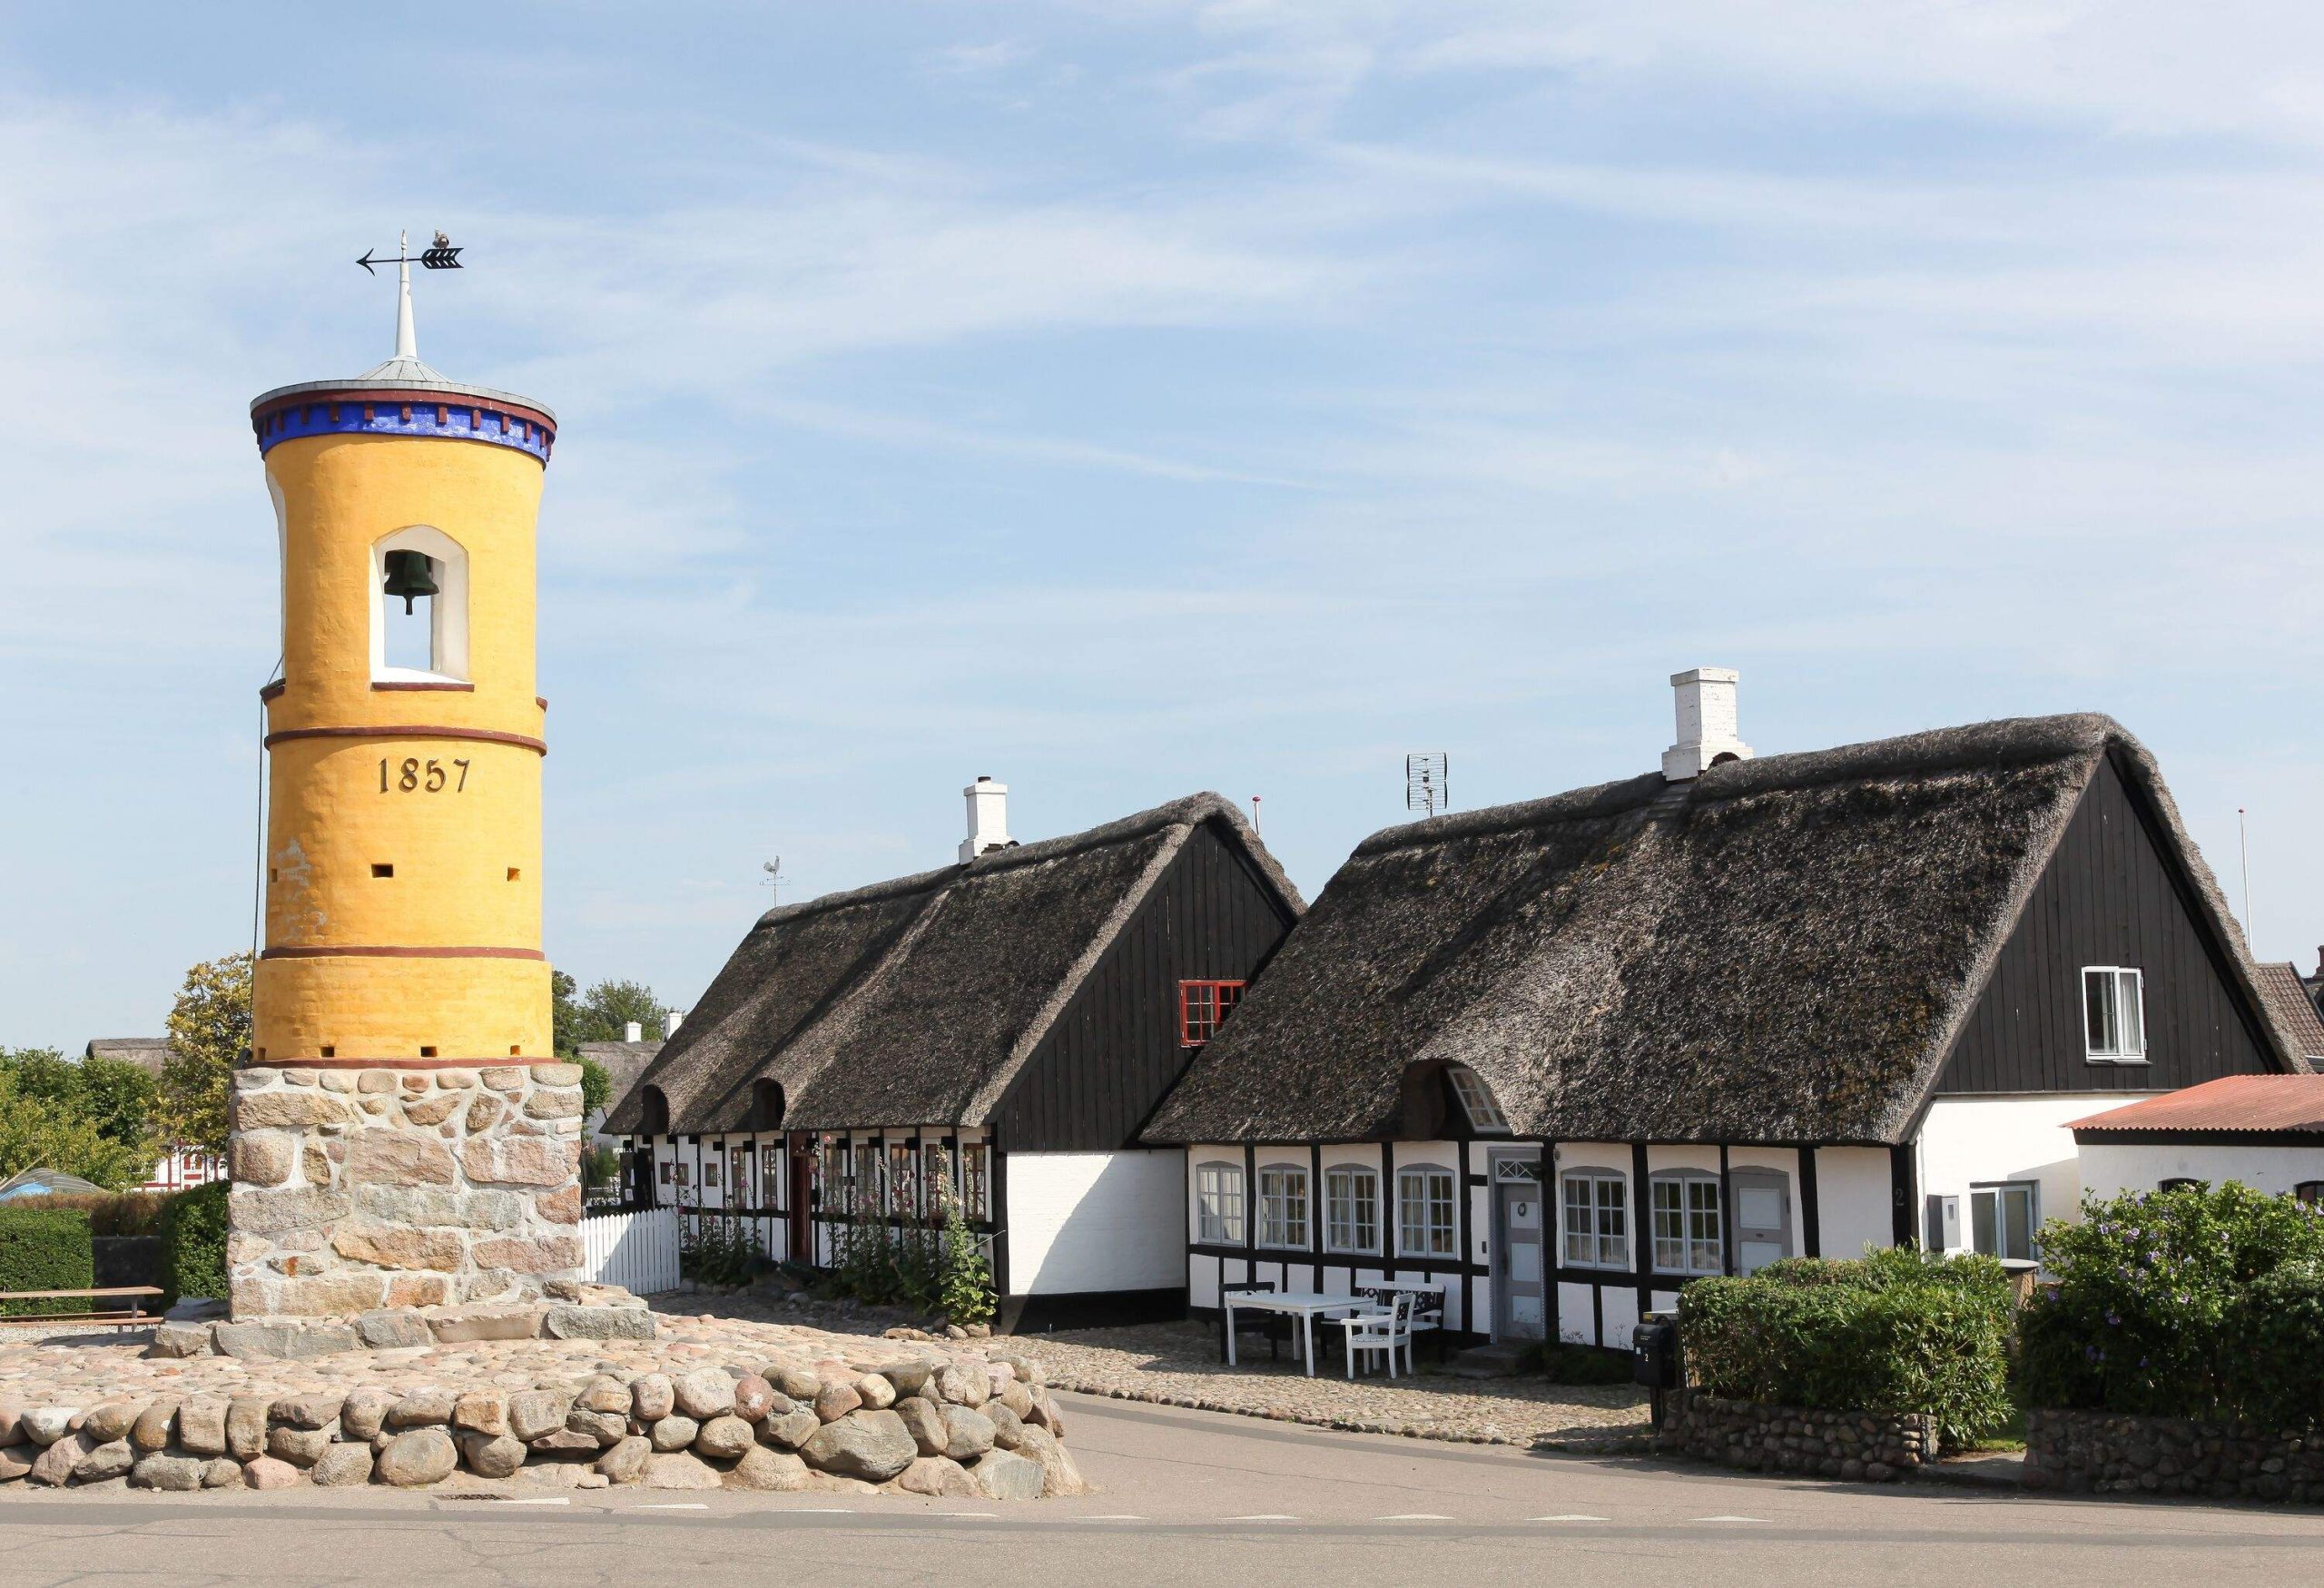 A yellow bell tower built on a drystone pedestal in front of traditional Danish farm houses.